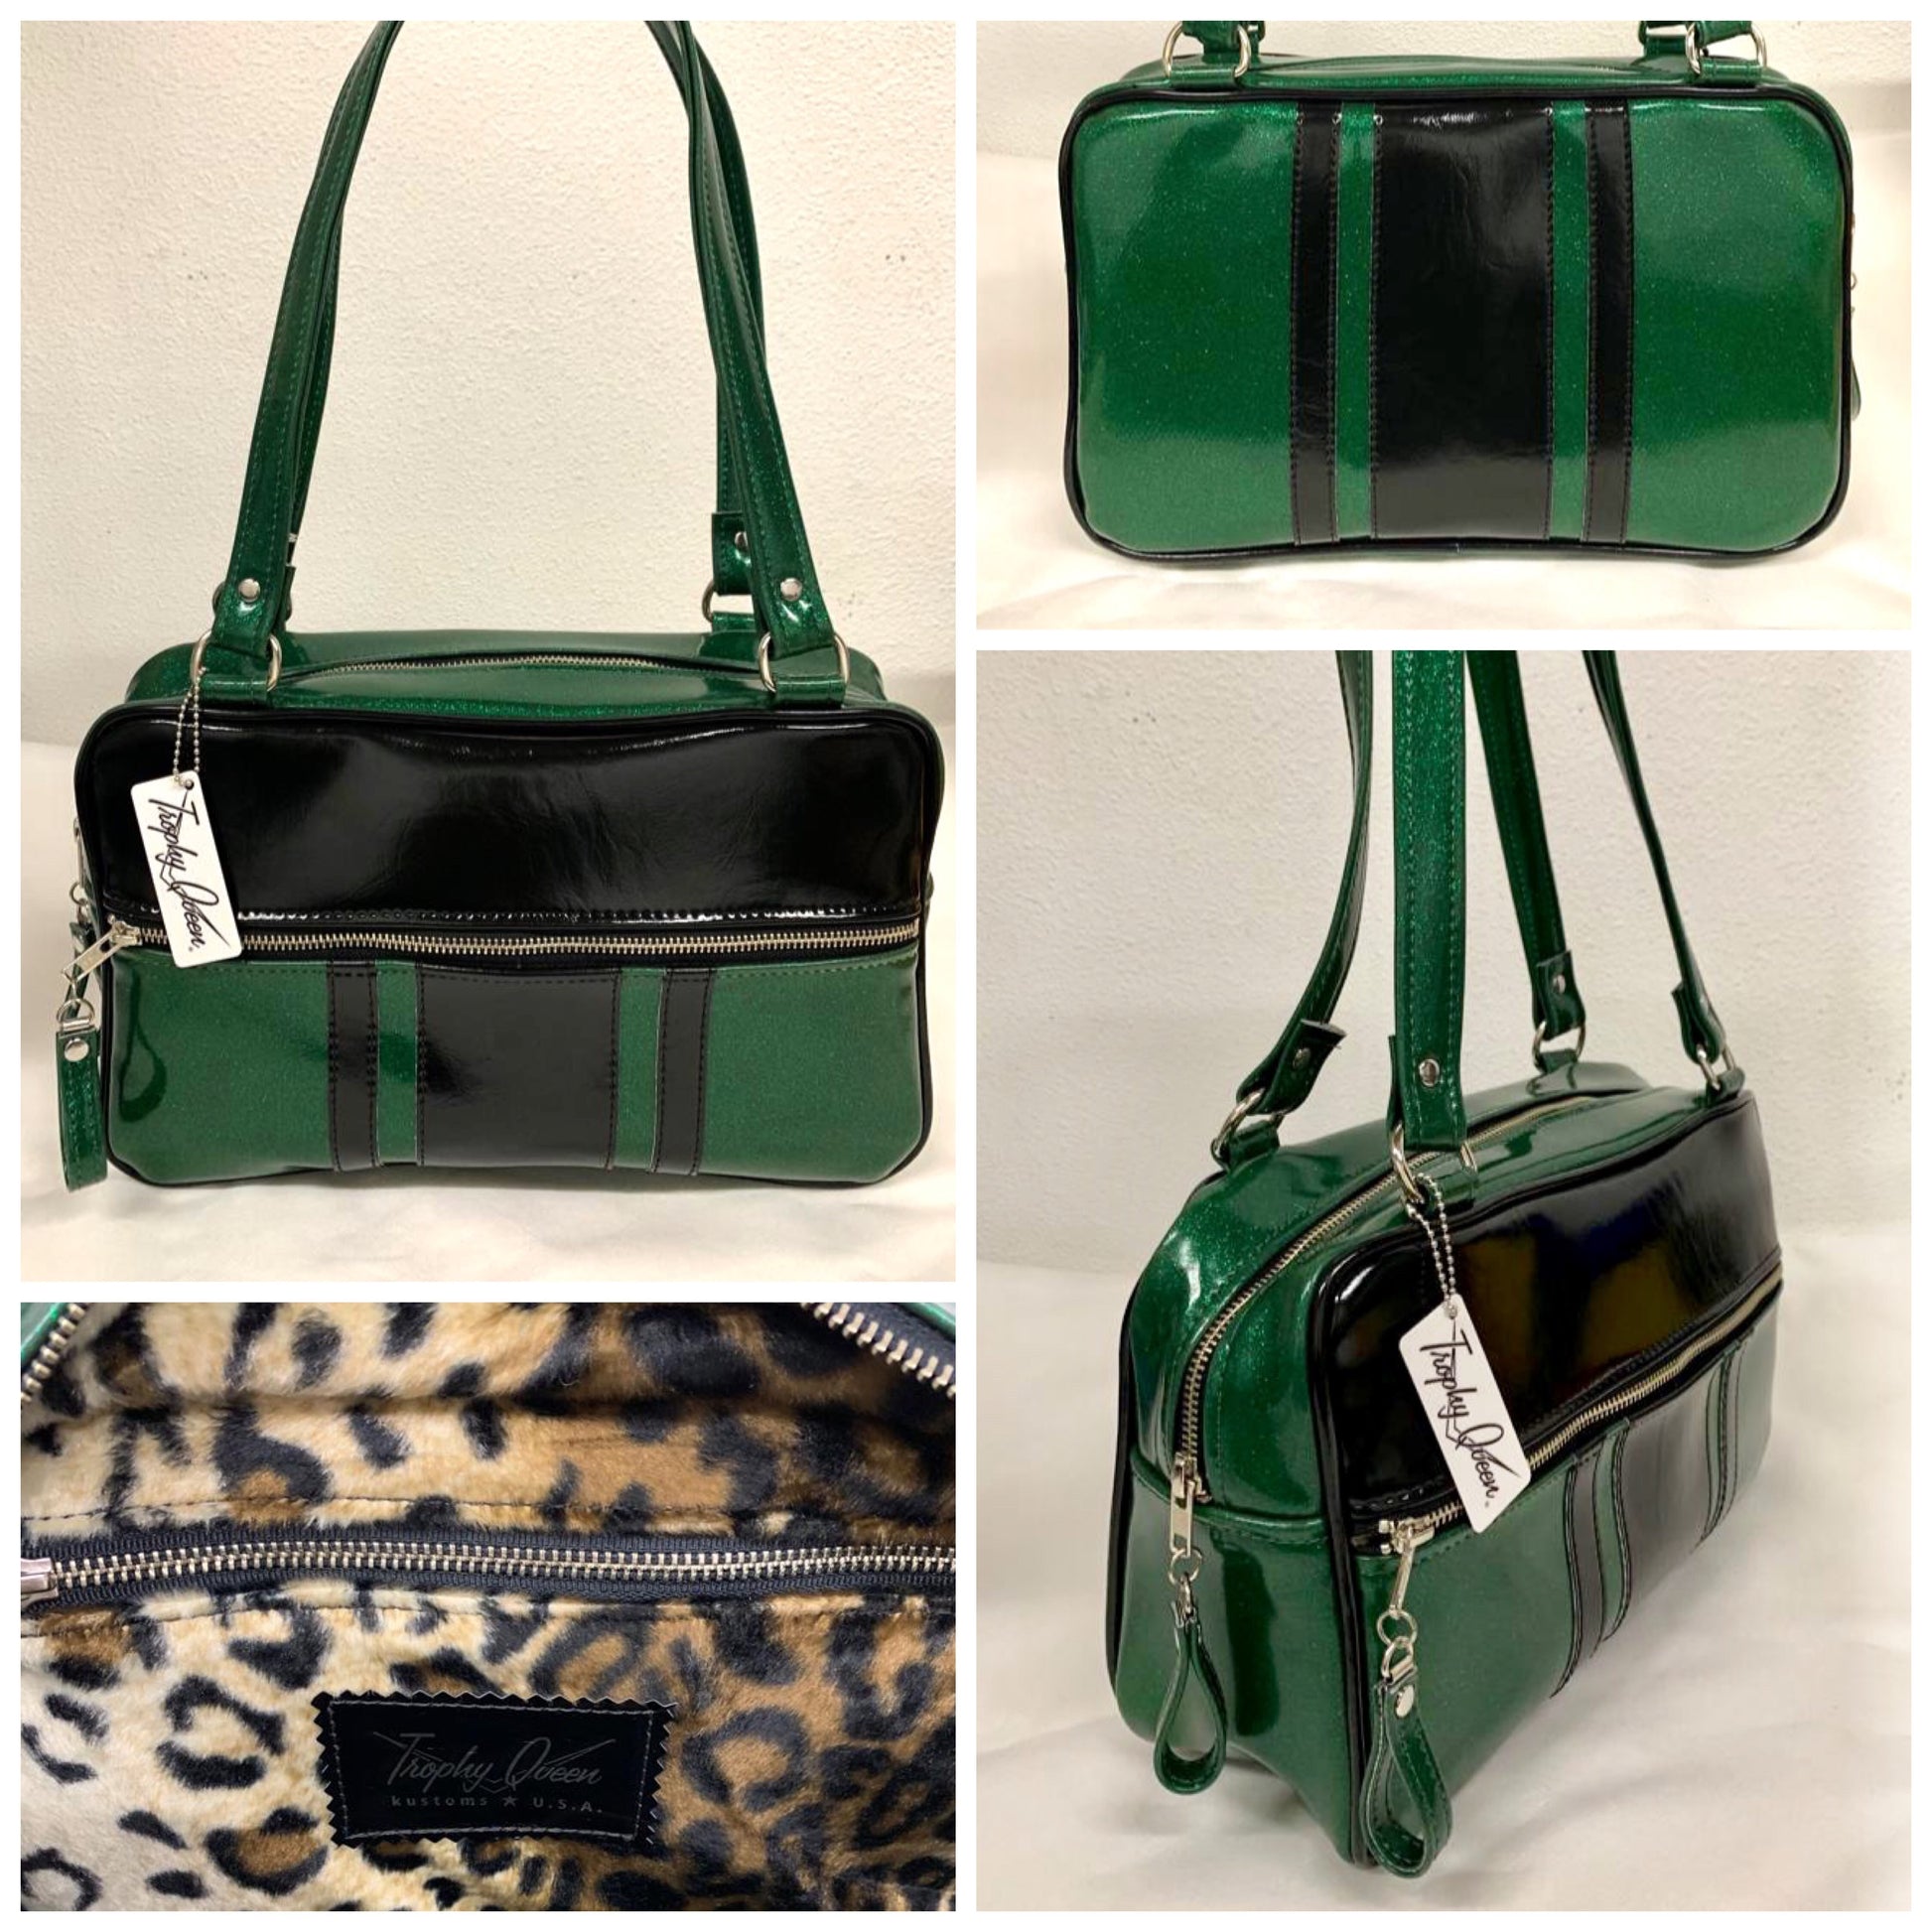 The Galaxy Tote Bag is slightly larger than the Galaxy Shoulder Bag in Green Glitter Vinyl and Grease Black Vinyl Stripes with Plush Leopard Lining. Made with nickel hardware and nickel feet, vinyl zipper pull, and 25” (61cm) straps. Inside you’ll find an open divided pocket, a zipper pocket with serial number inside and signature Trophy Queen Label. Ships from California with an extra set of replacement straps included.